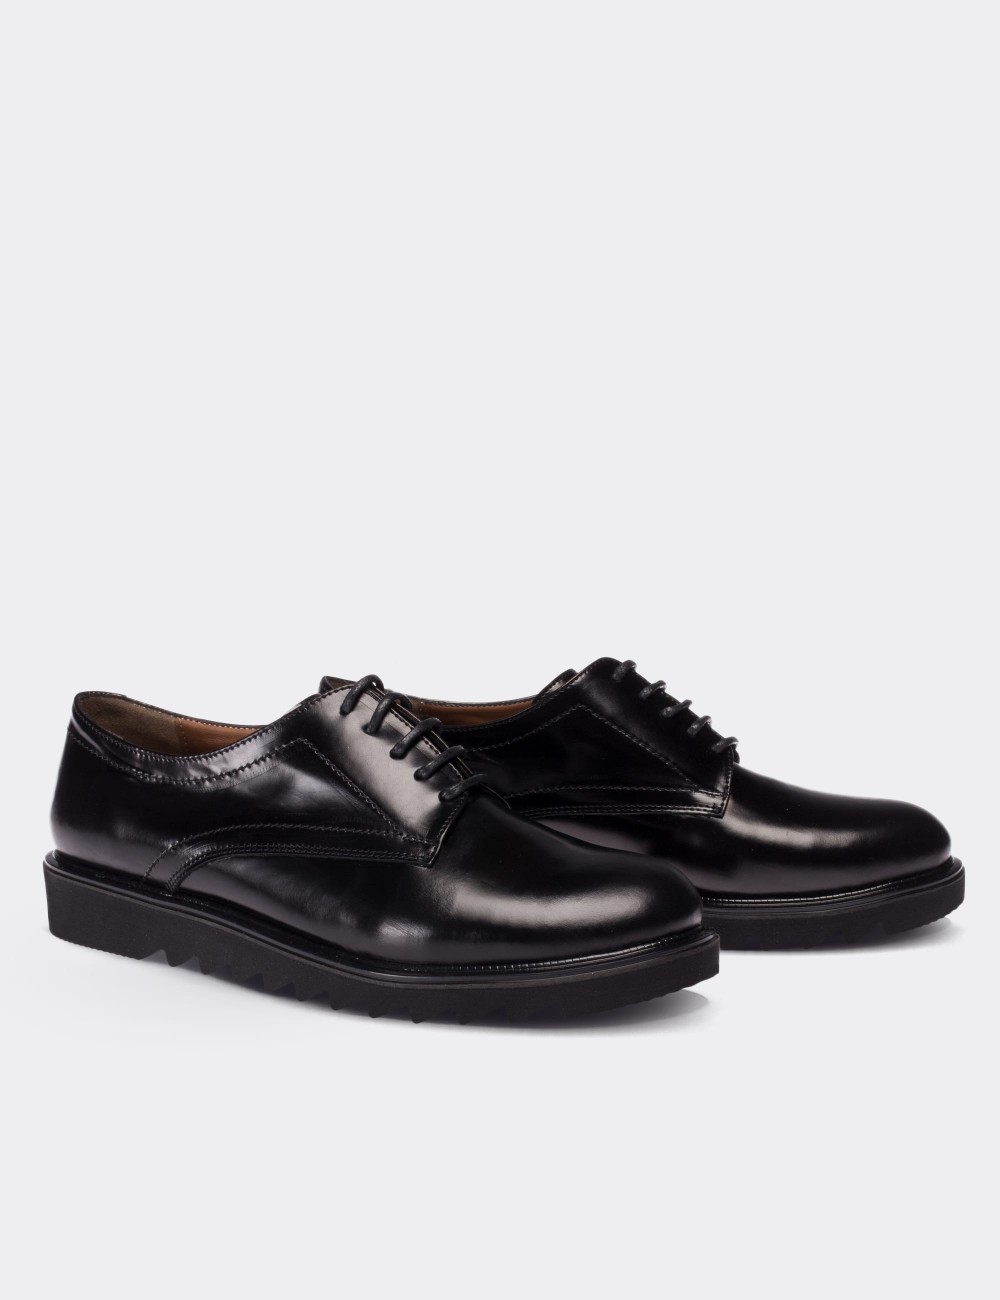 Black  Leather Lace-up Oxford Shoes - 01430ZSYHE08